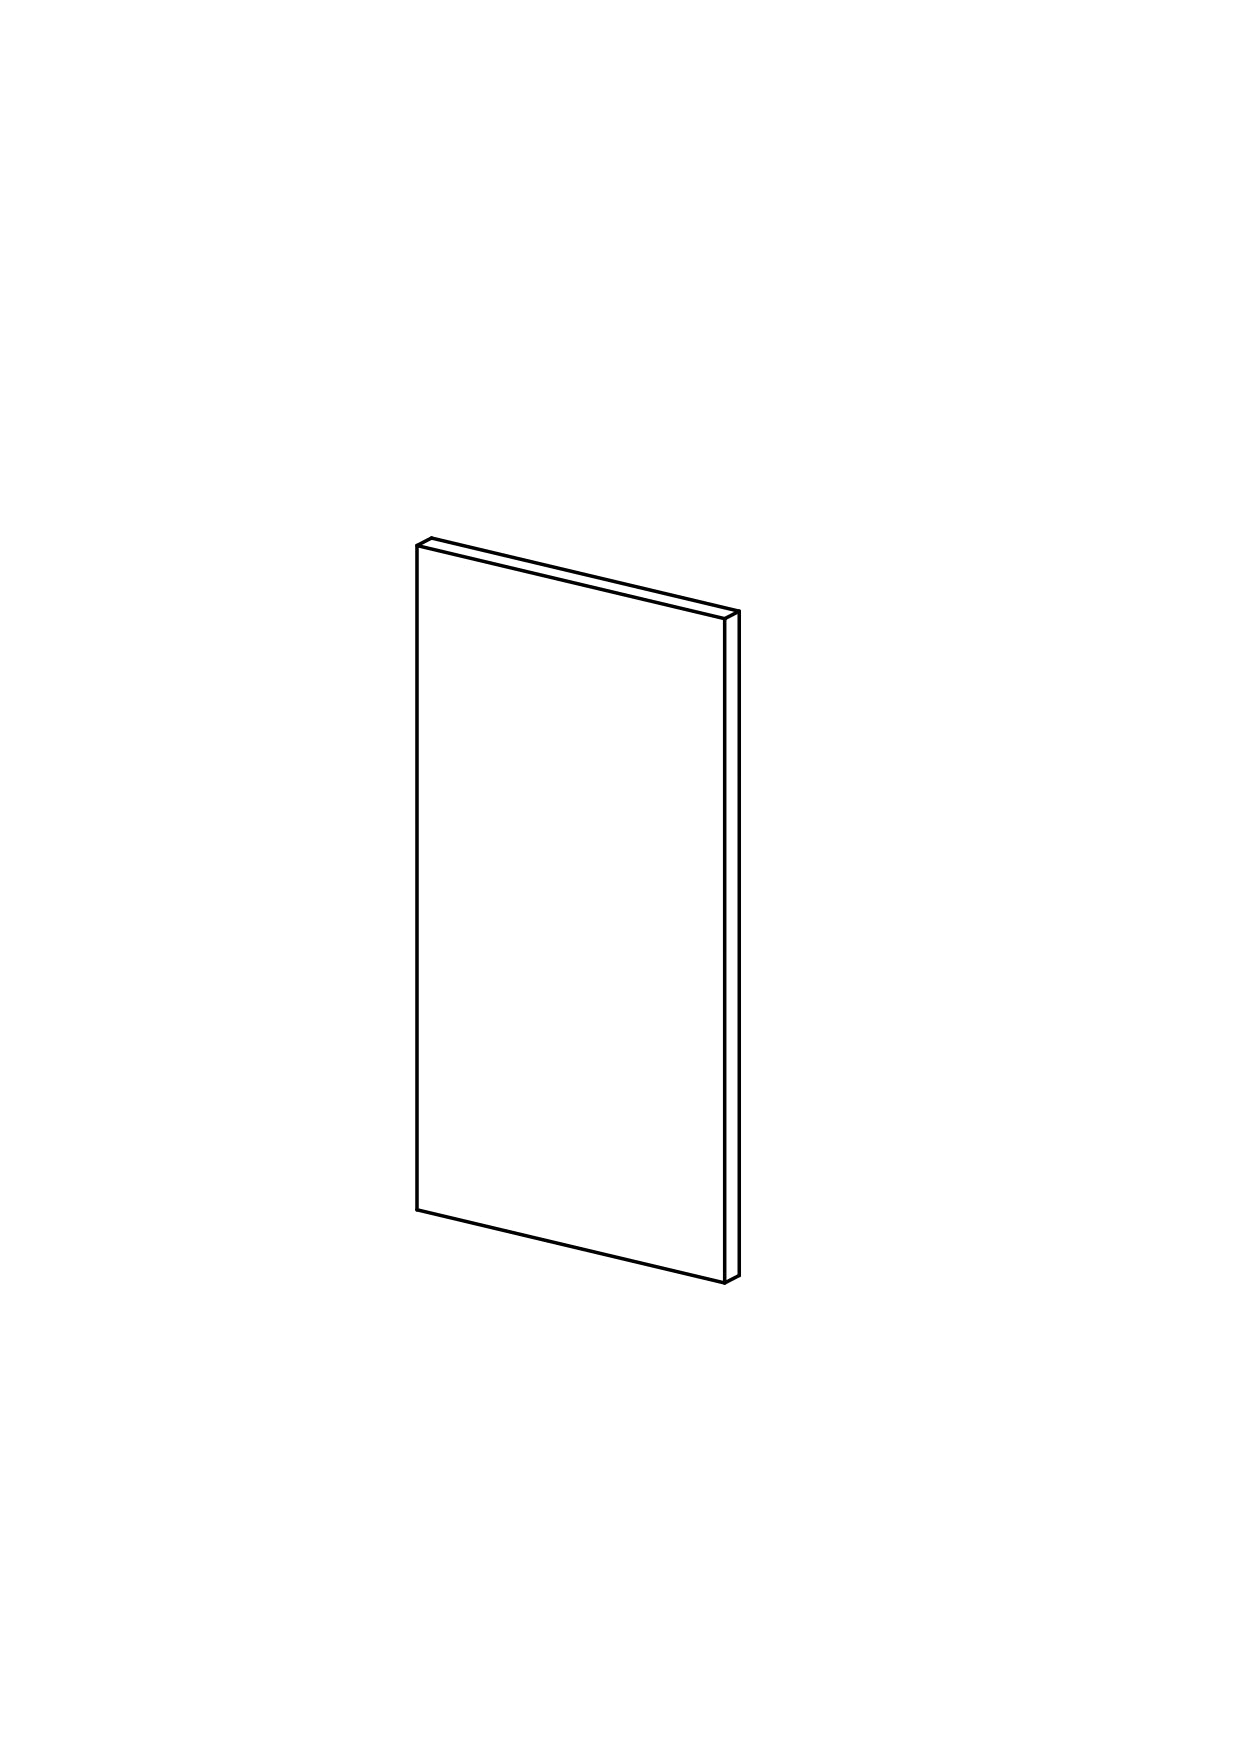 62x120 - Cover Panel - Plain - Unpainted (Raw) - METOD